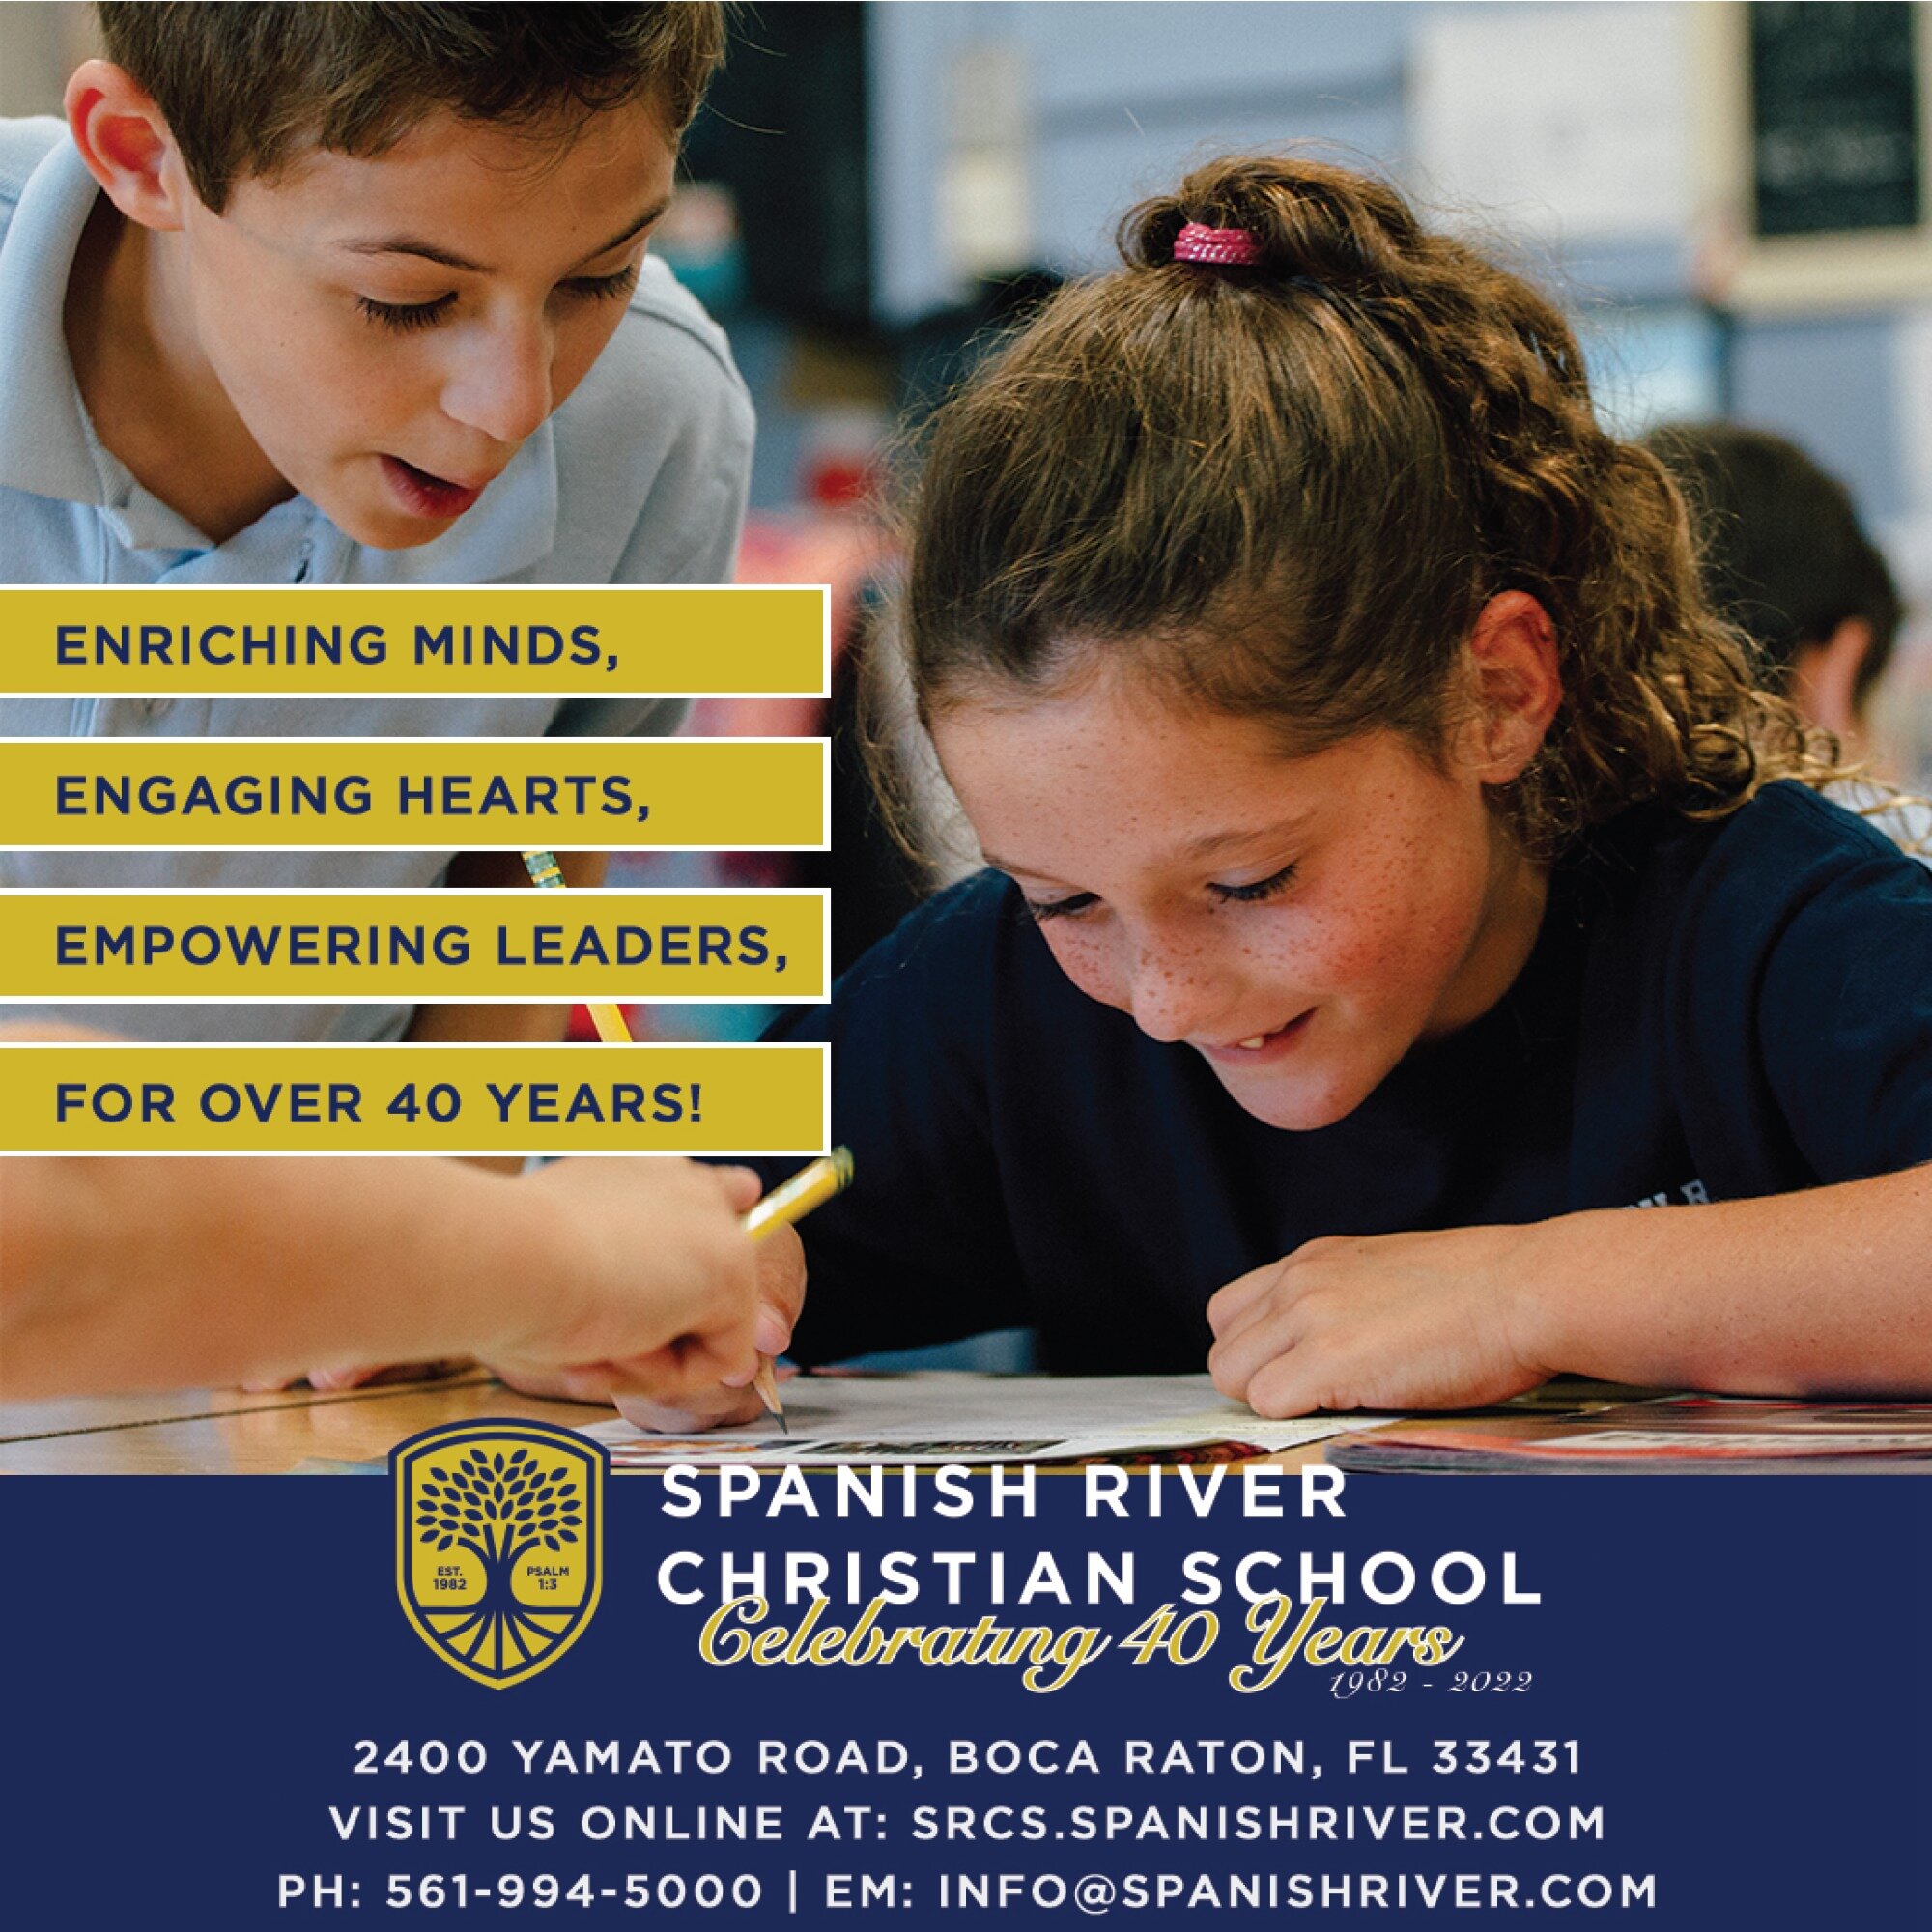 Located in the heart of Boca Raton, Florida, Spanish River Christian School offers a total educational program in preschool 3's through 8th grade. Through an Integrated curriculum, structured to prepare your child to compete in today's society from a